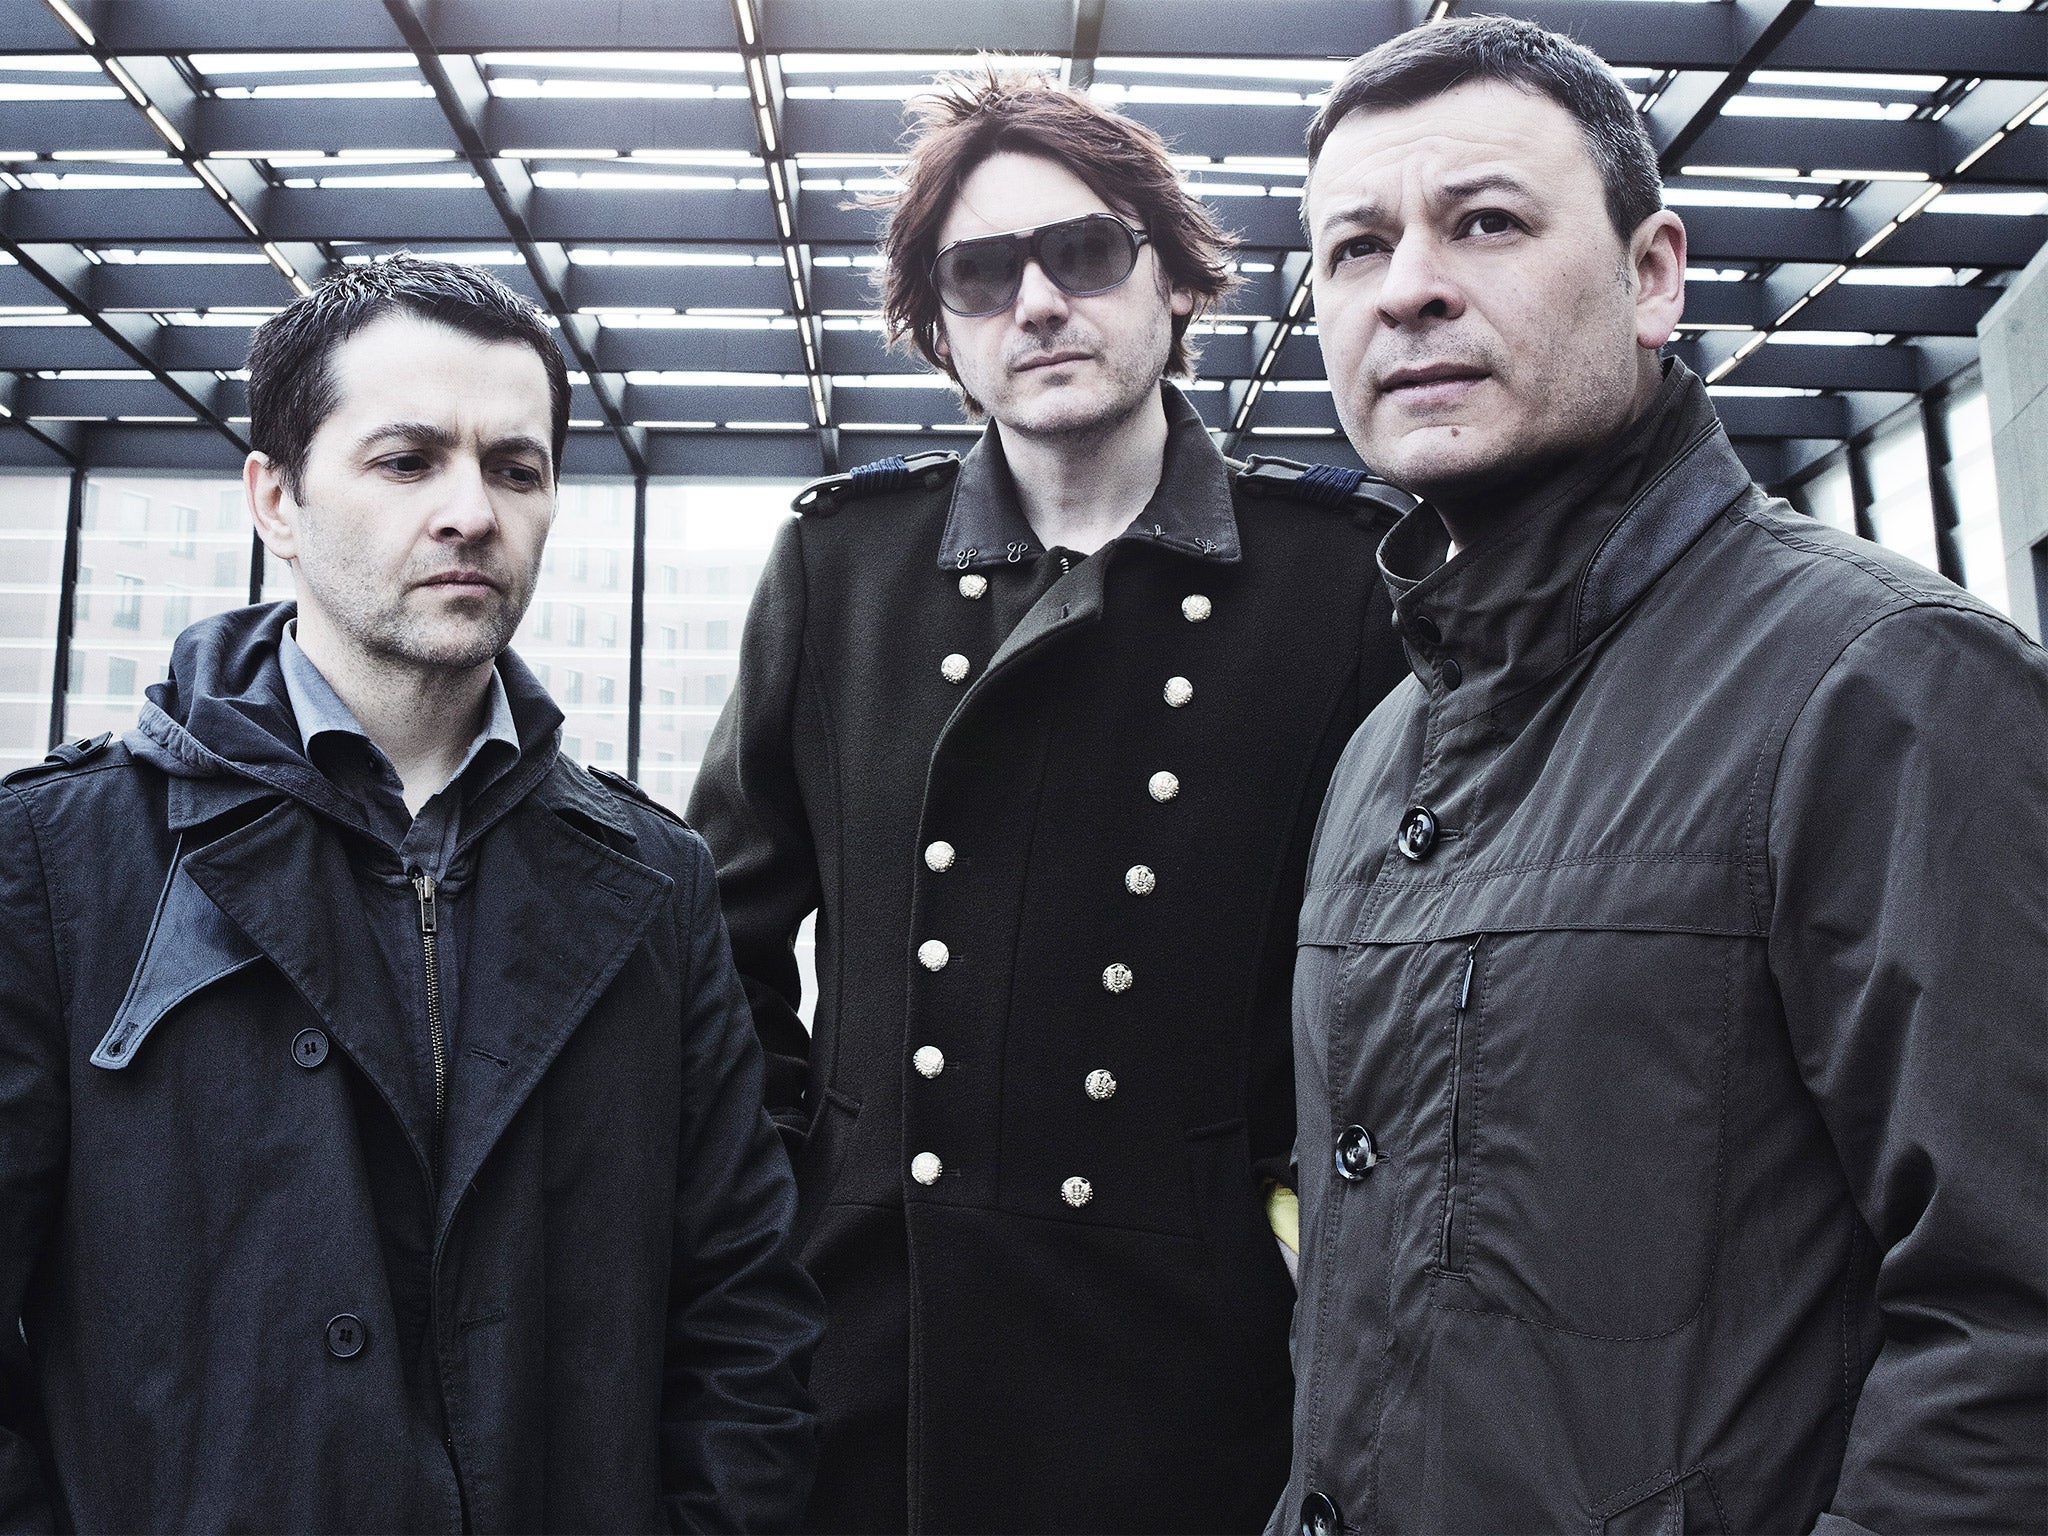 Manic Street Preachers, profile: The rock band set to release the